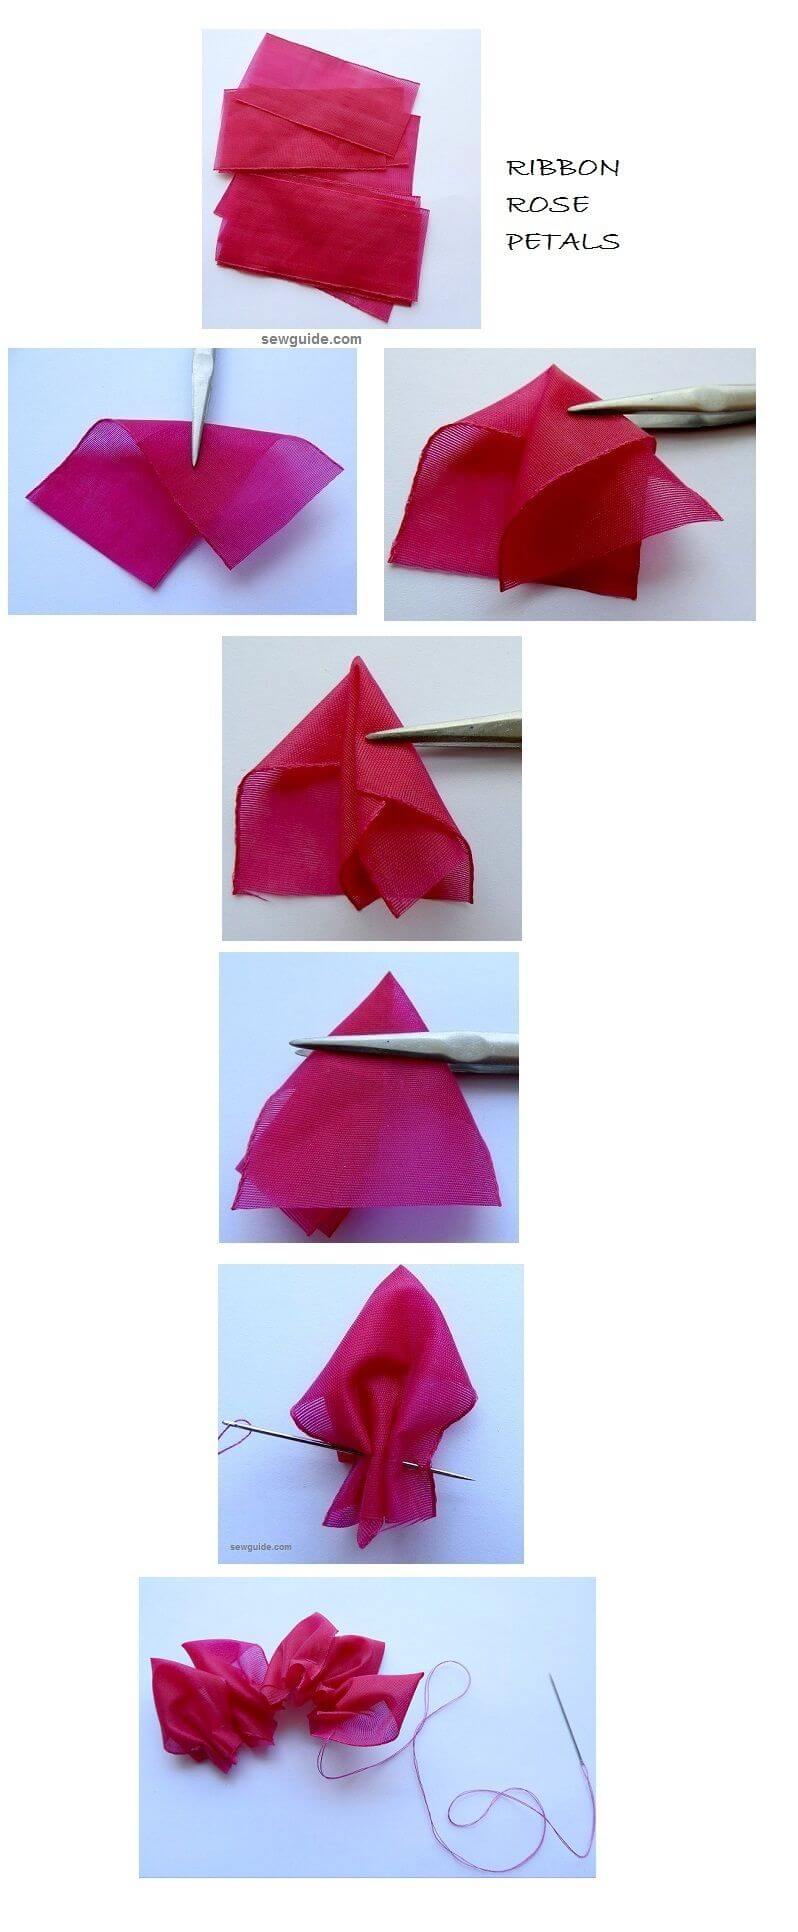 How to fold the ribbon pieces to make the rose